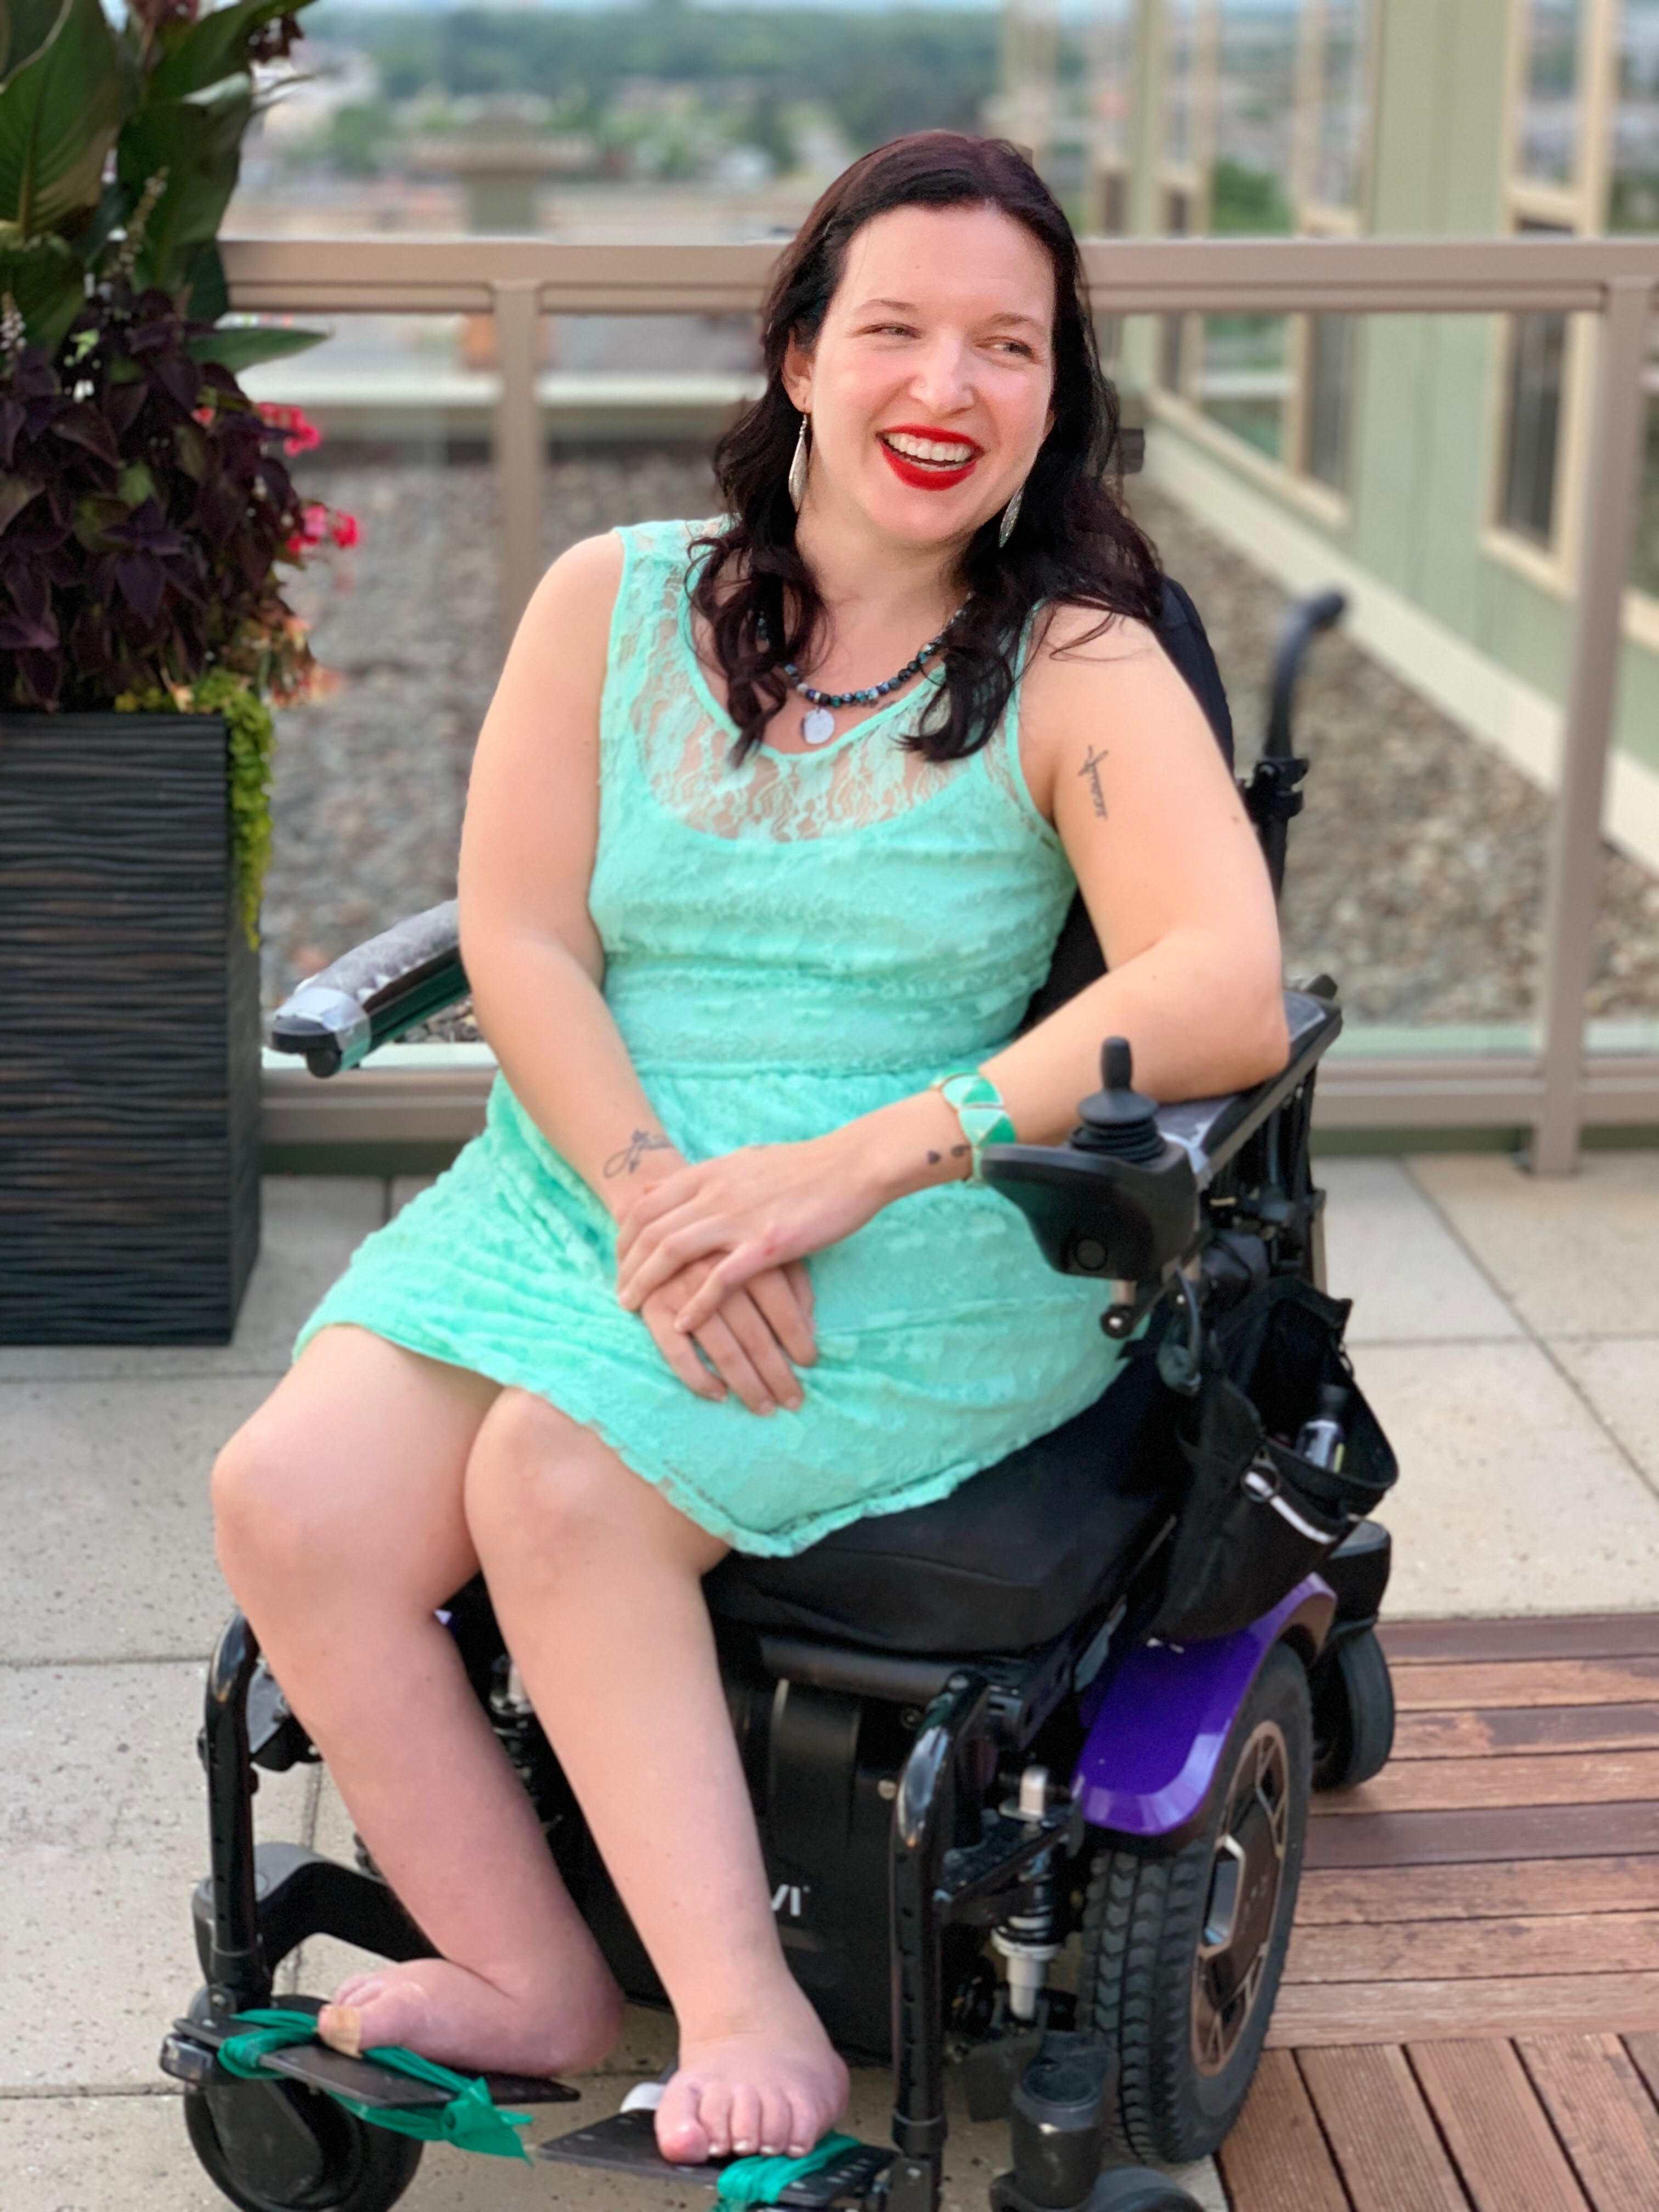 Mollie smiling. She is sitting in her power wheelchair and wearing a bright turquoise dress.